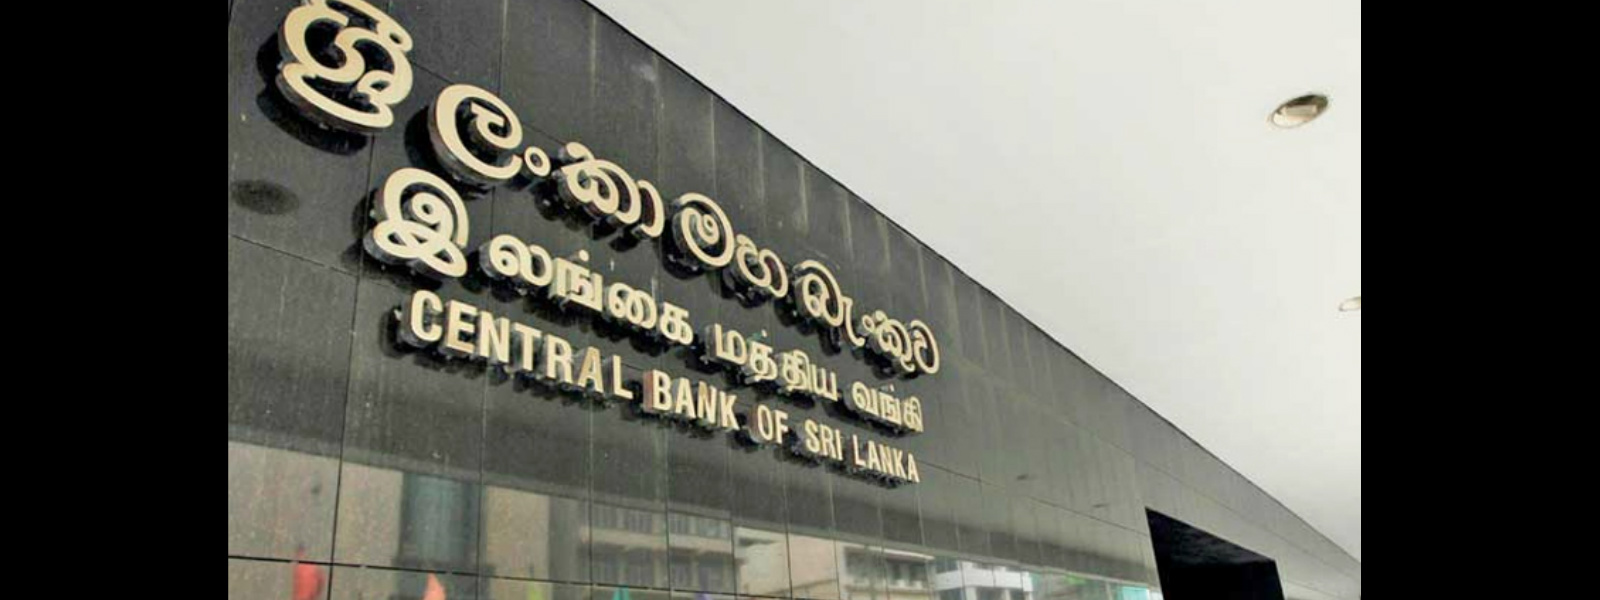 How much debt does Sri Lanka have to settle?